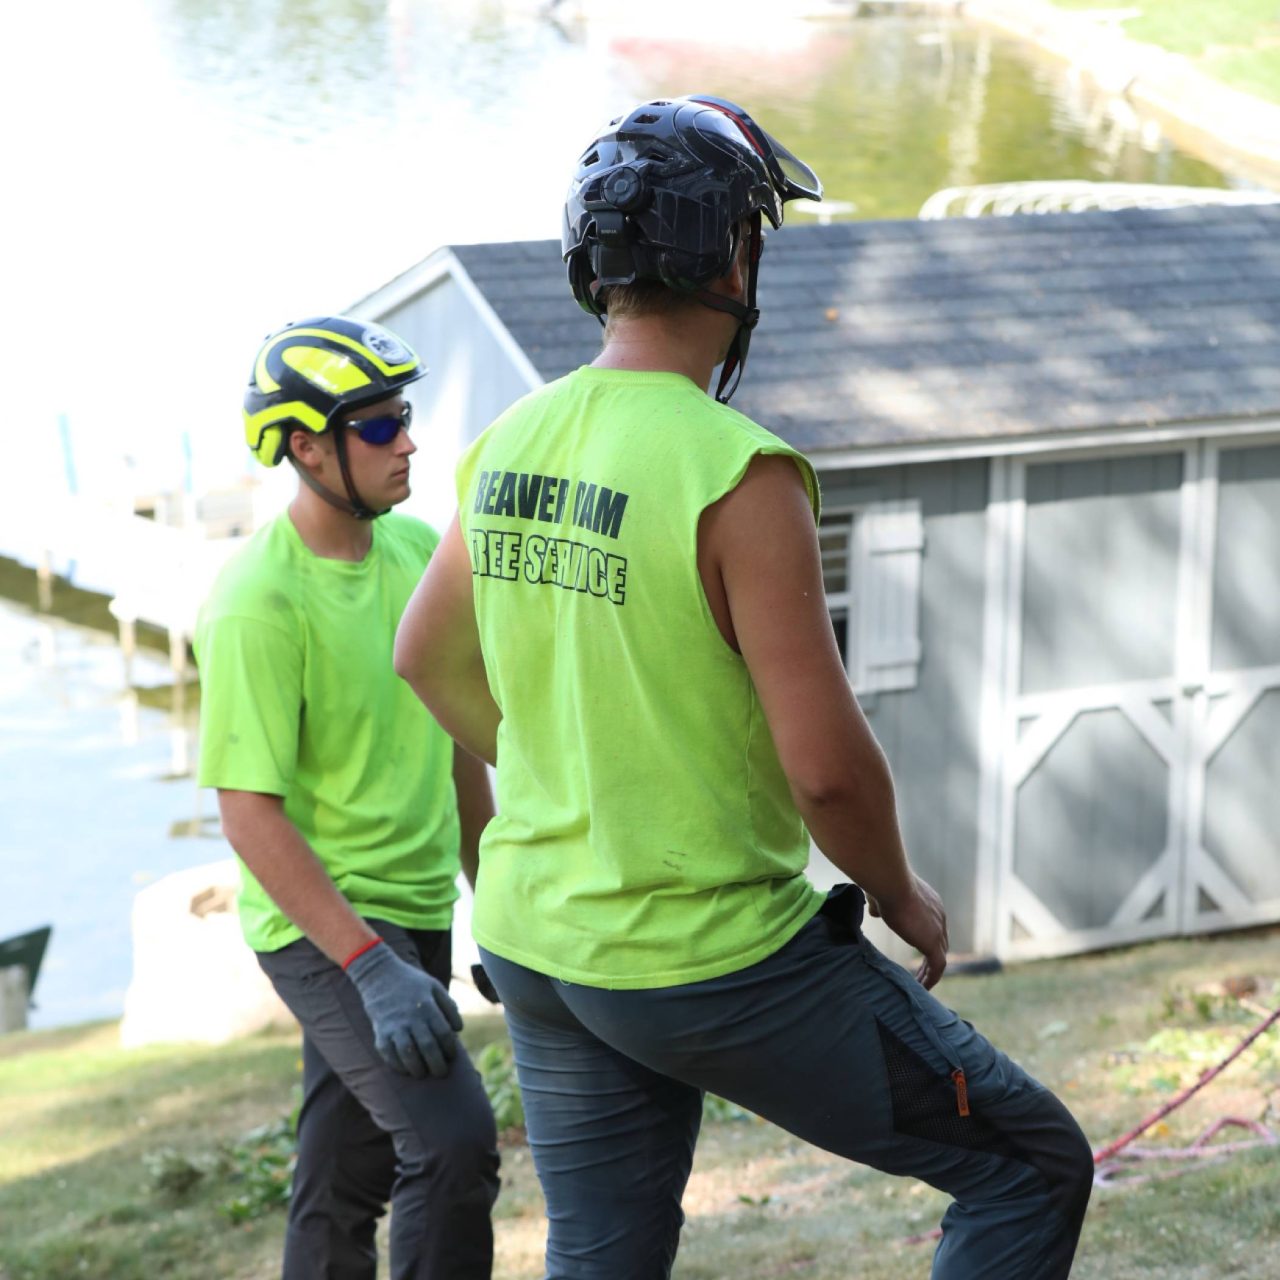 Two Beaver Dam Tree Service employees standing wearing helmets and fluorescent green t-shirts.